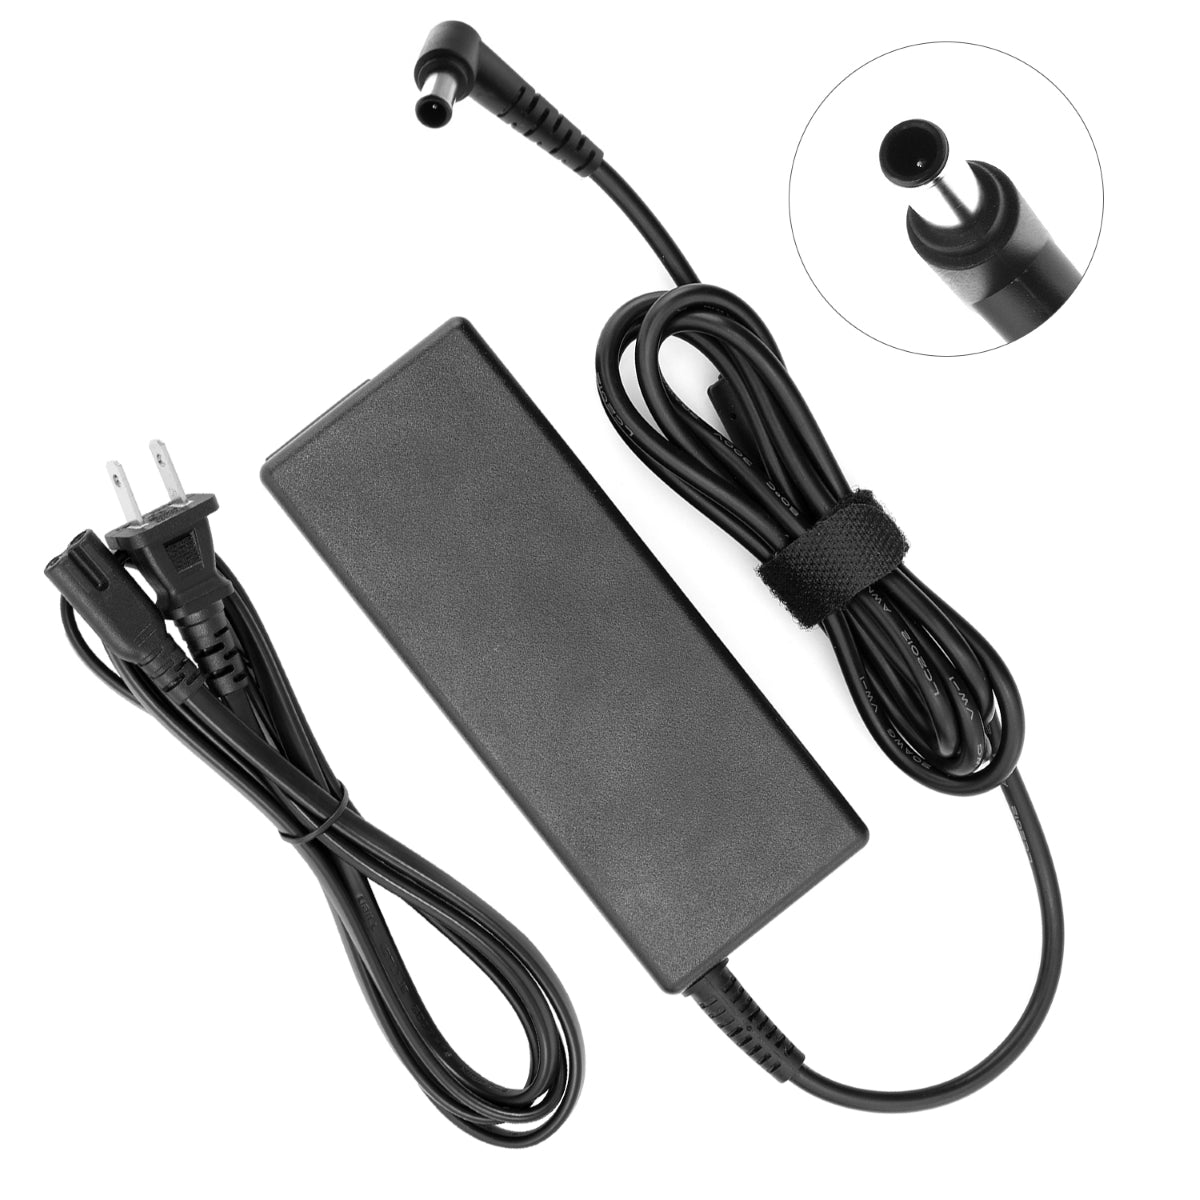 AC Adapter Power Supply for Samsung AD-3014 Monitor